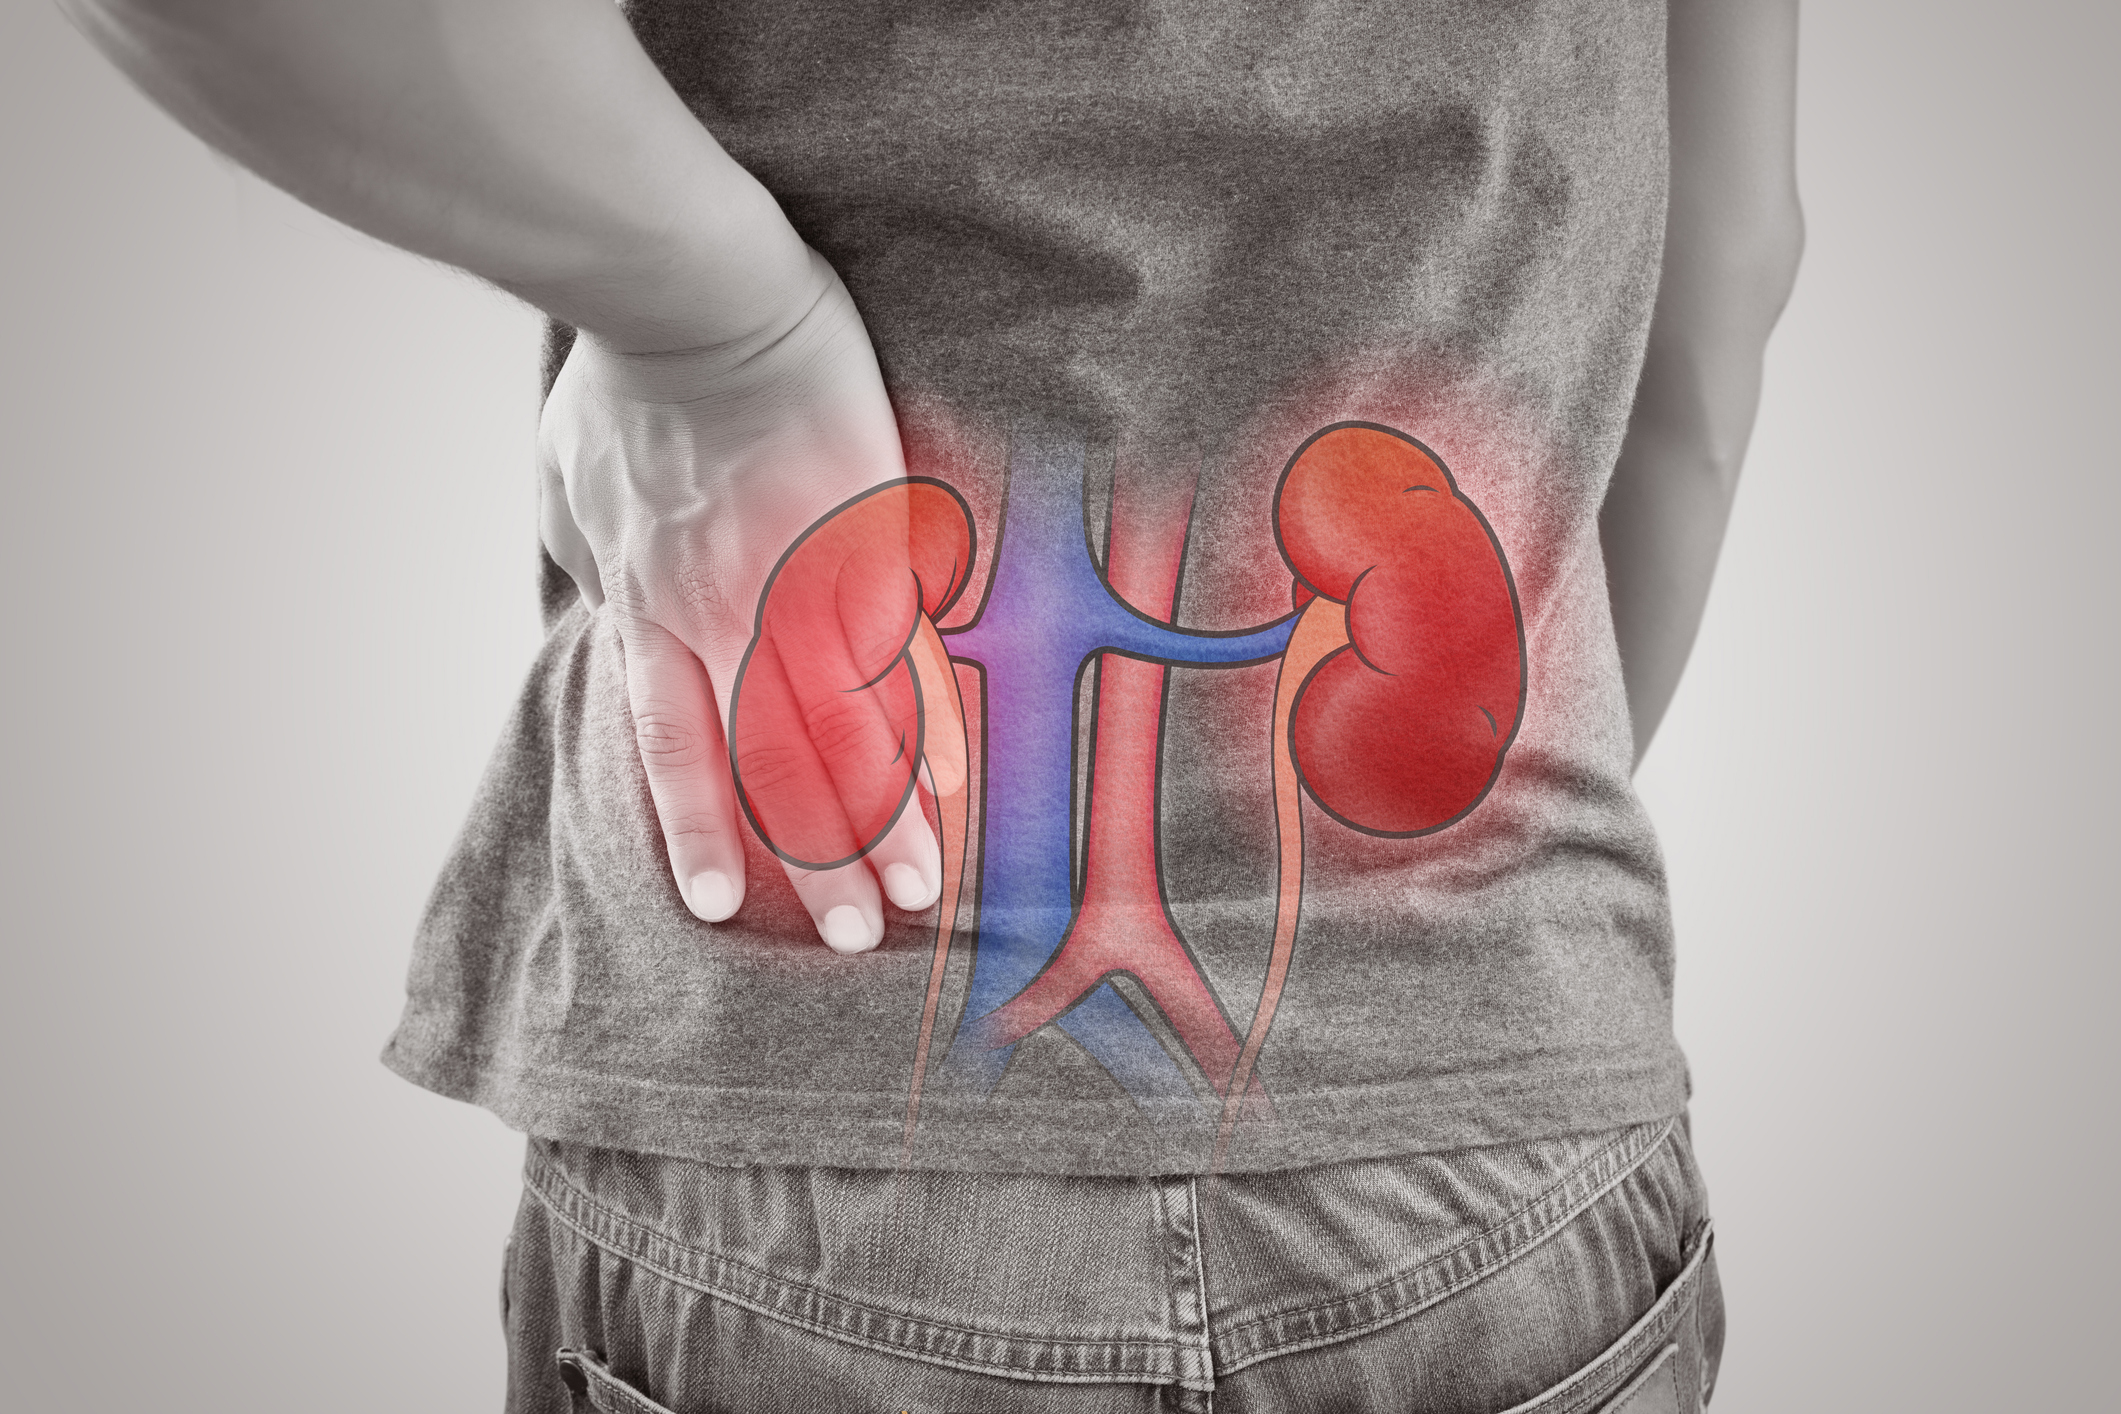 Signs You May Have Kidney Disease